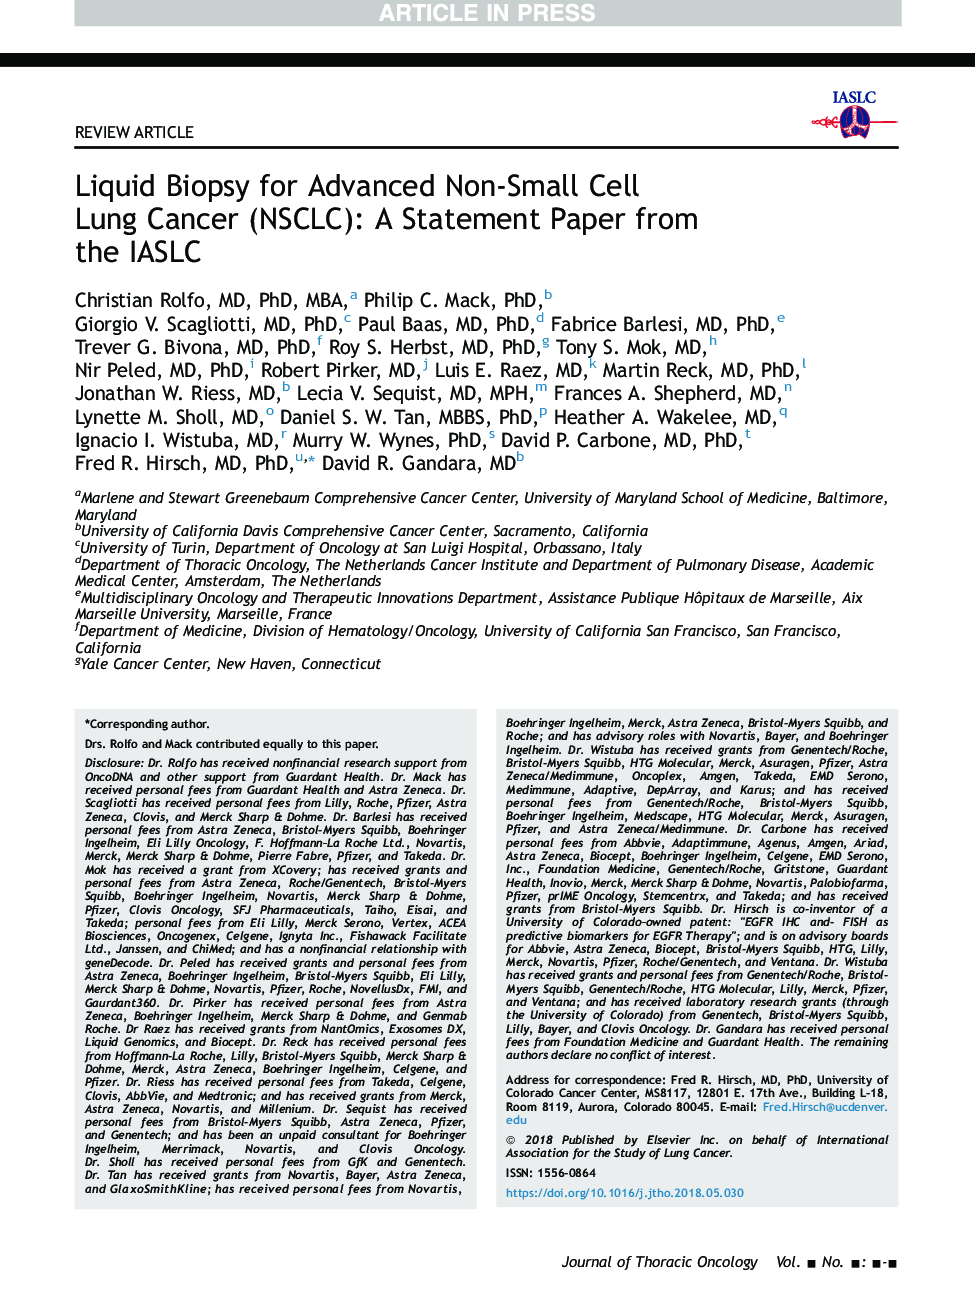 Liquid Biopsy for Advanced Non-Small Cell LungÂ Cancer (NSCLC): A Statement Paper from theÂ IASLC